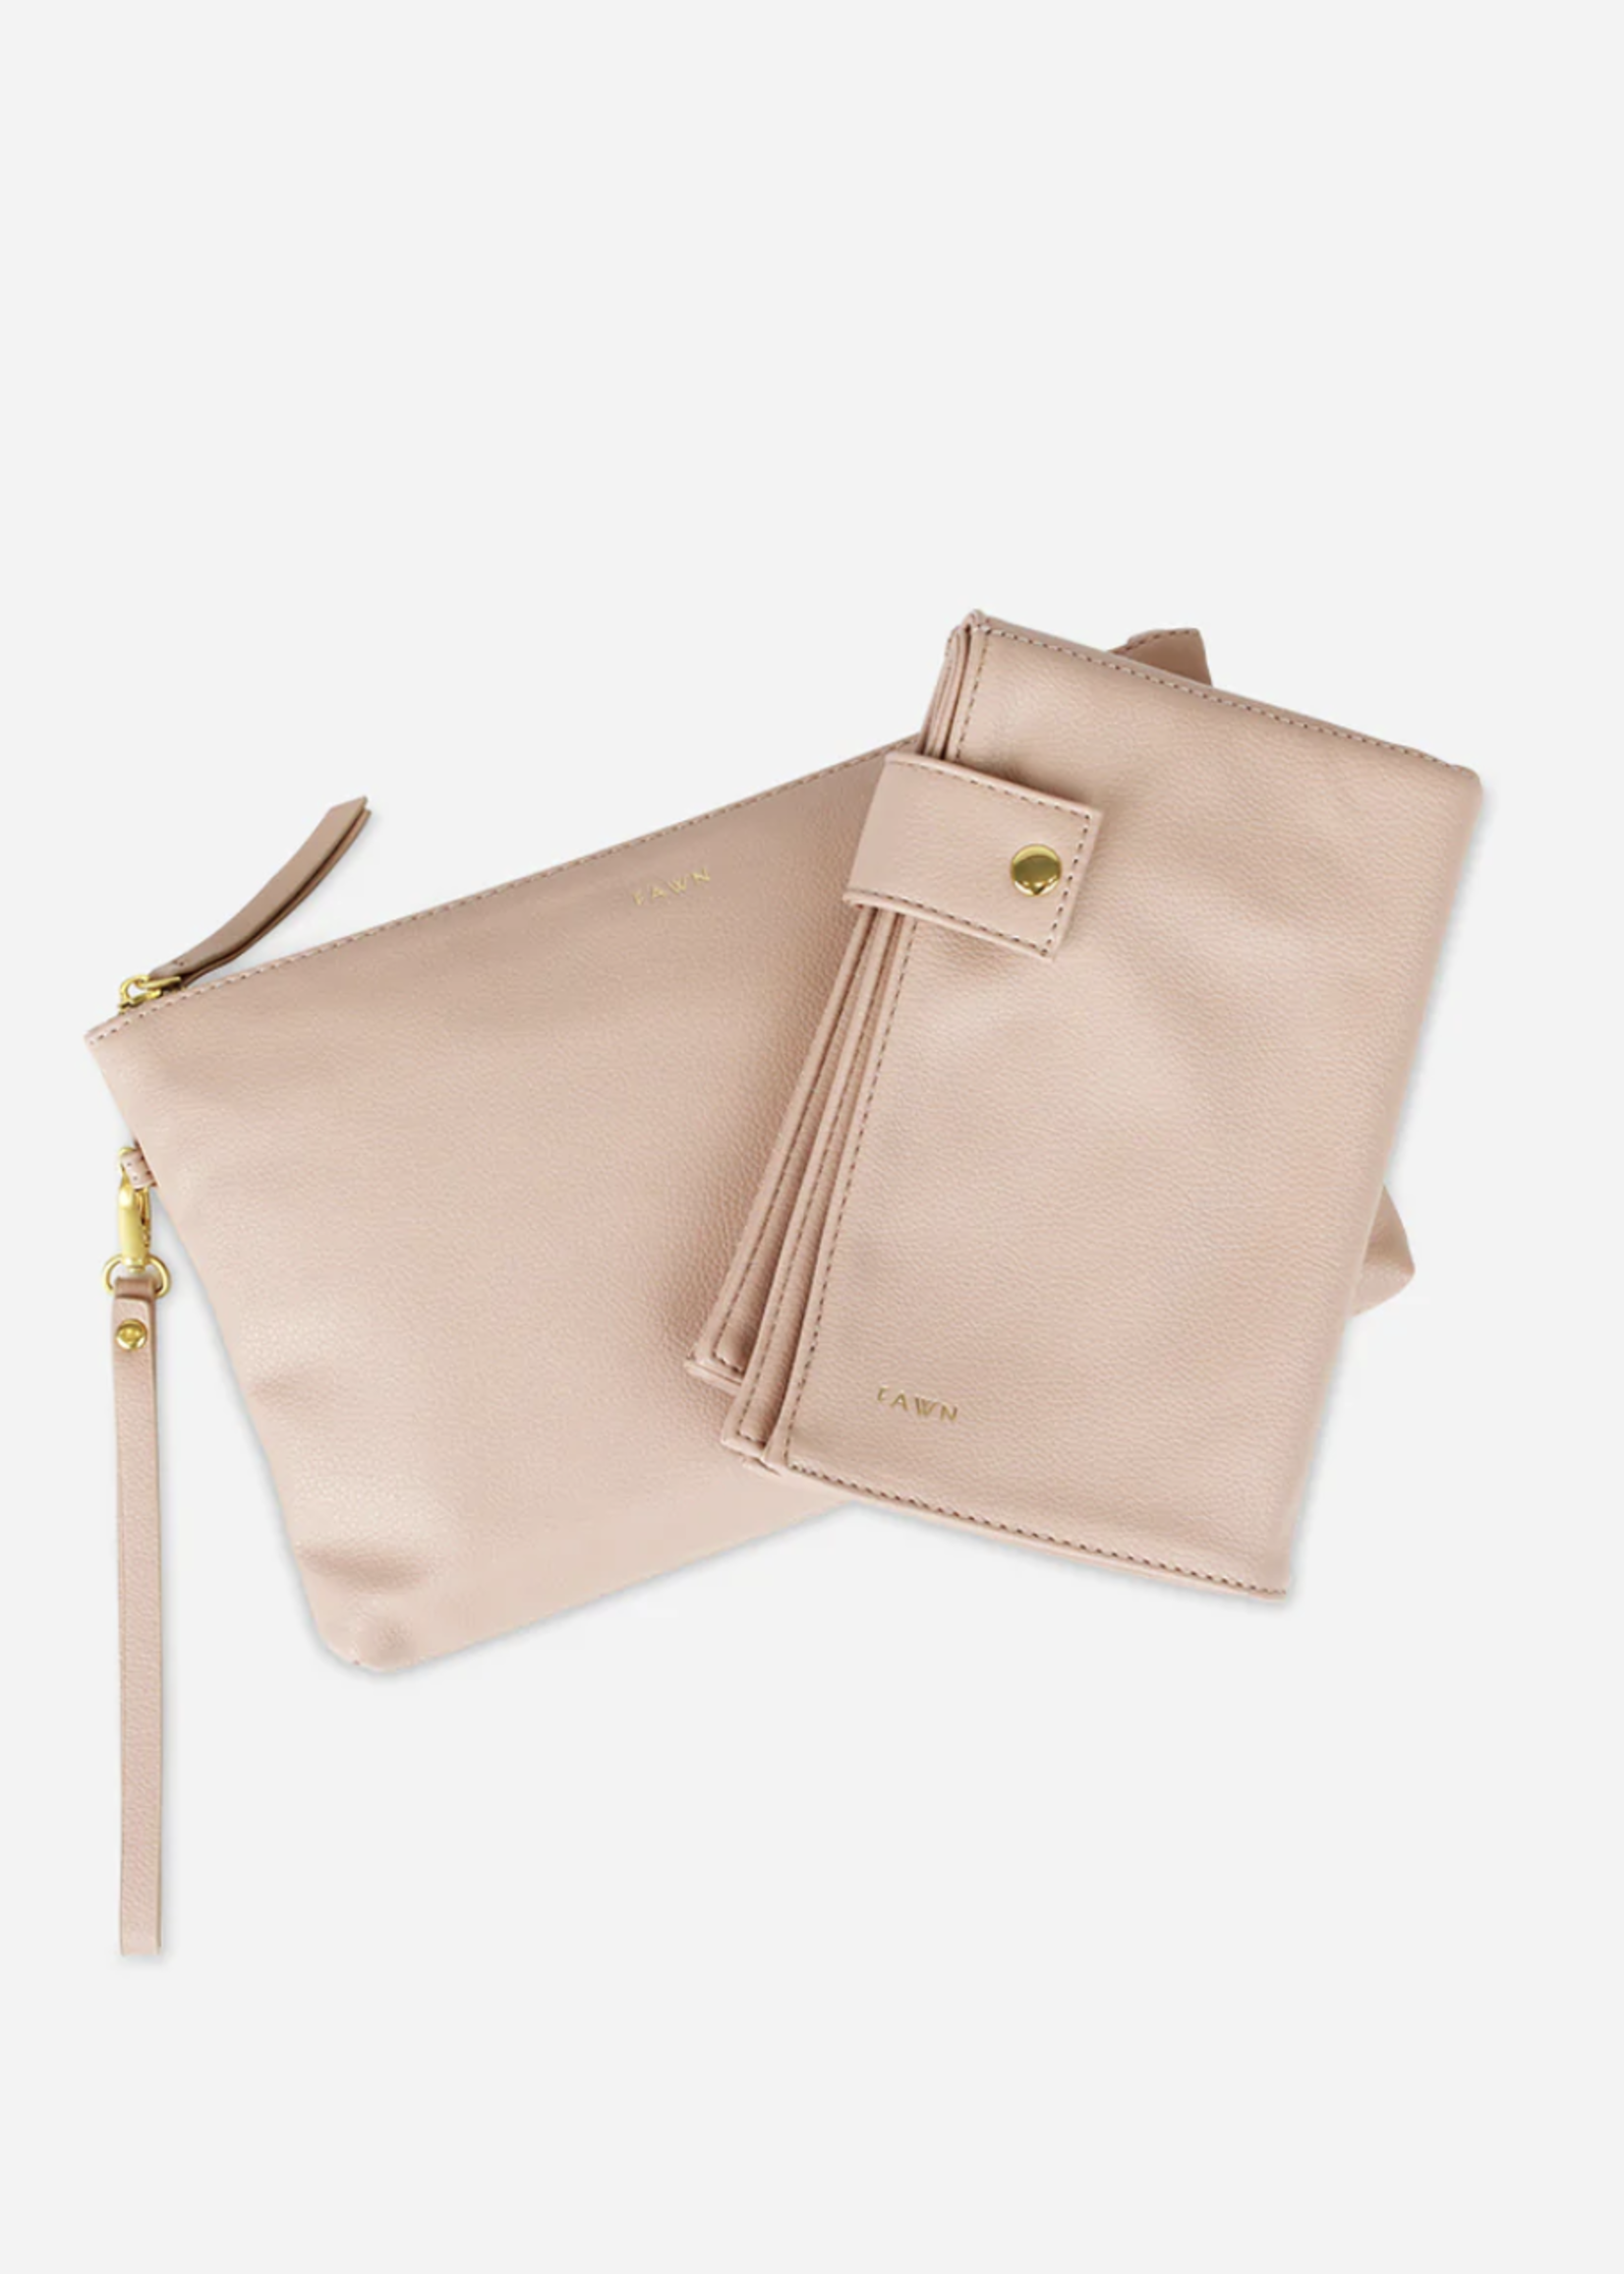 Elitaire Petite The Changing Clutch - Warm Blush